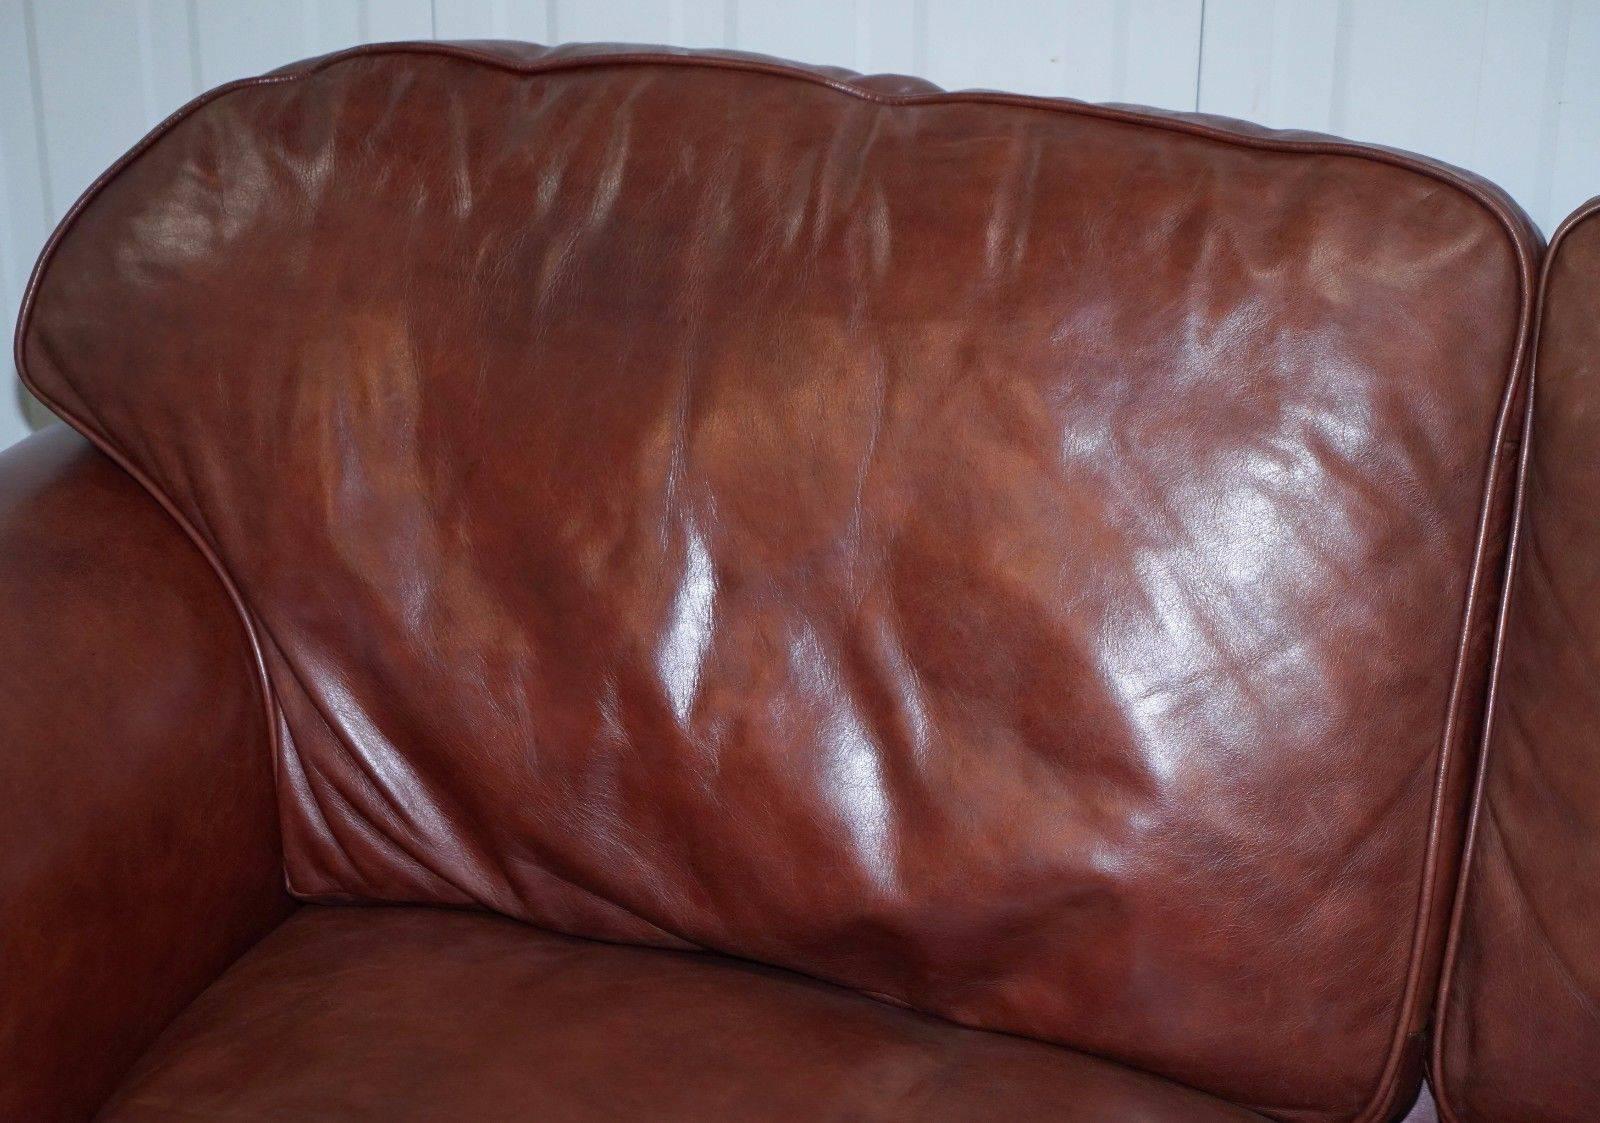 We are delighted to offer for sale one of two matching lovely Heritage brown 100% cattle hide leather Laura Ashley Winchester large two and a half seater sofas RRP £2399

We have two of these, this auction is for one, the other is listed under my